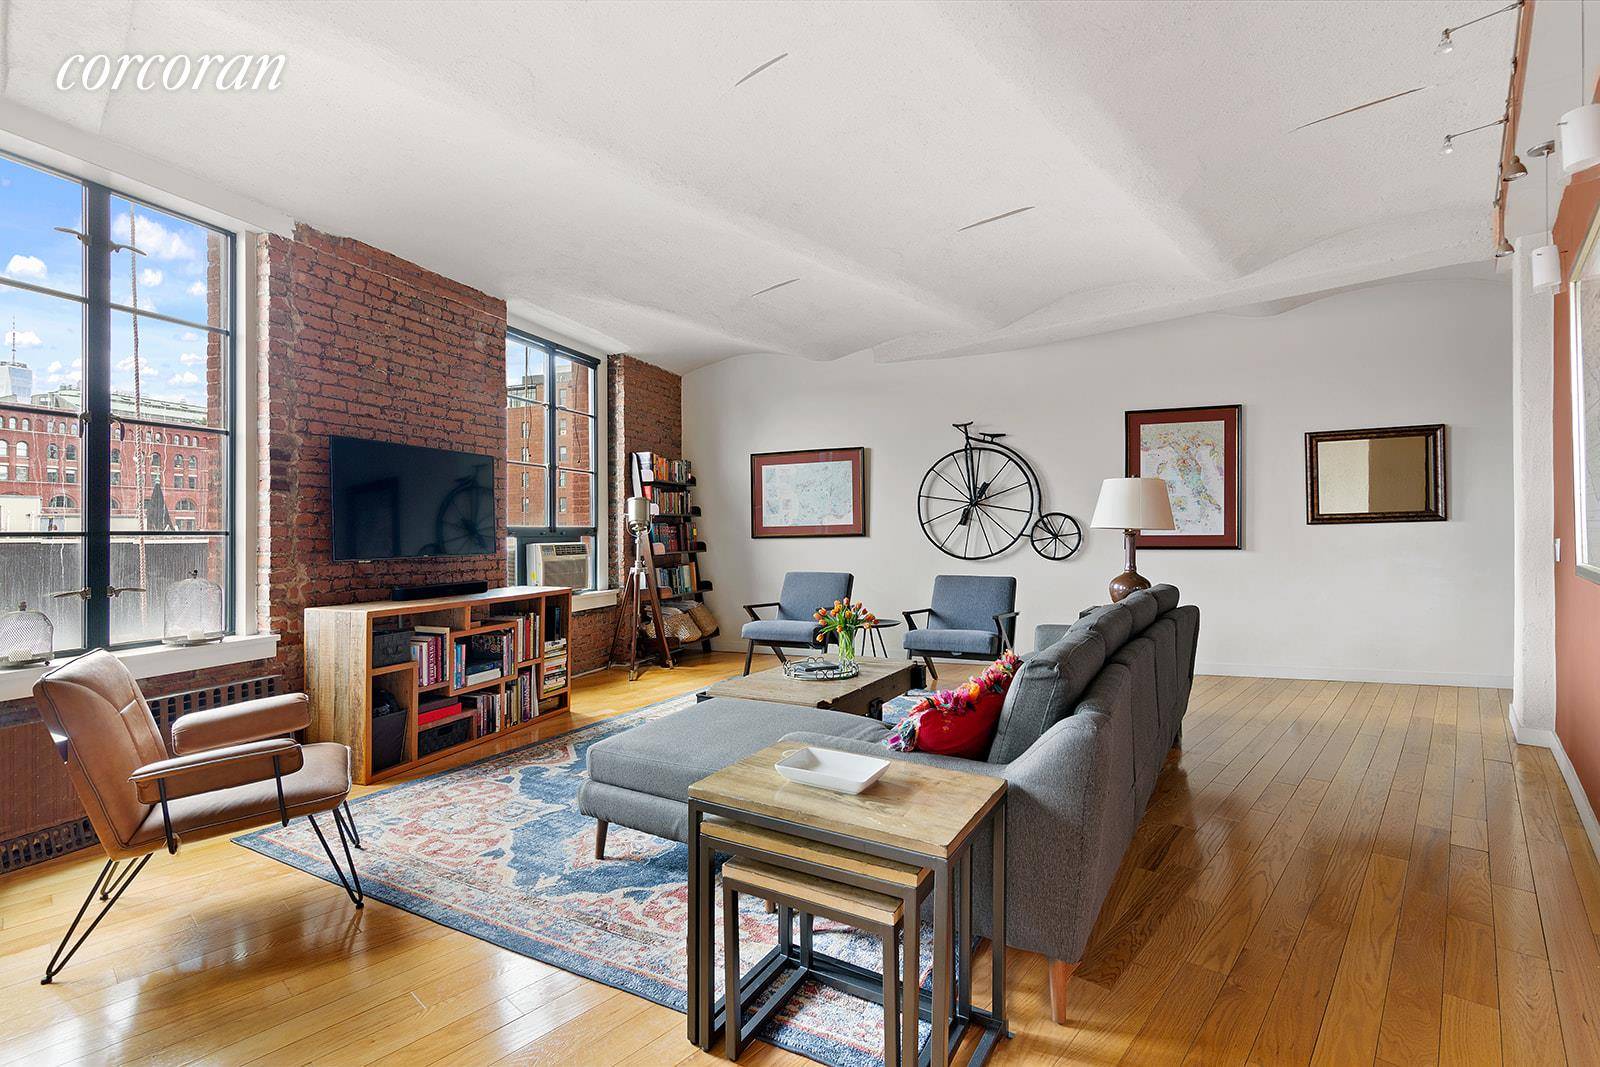 History and elegance combine to make this spacious two bed, two bath co op apartment the perfect West Village home.